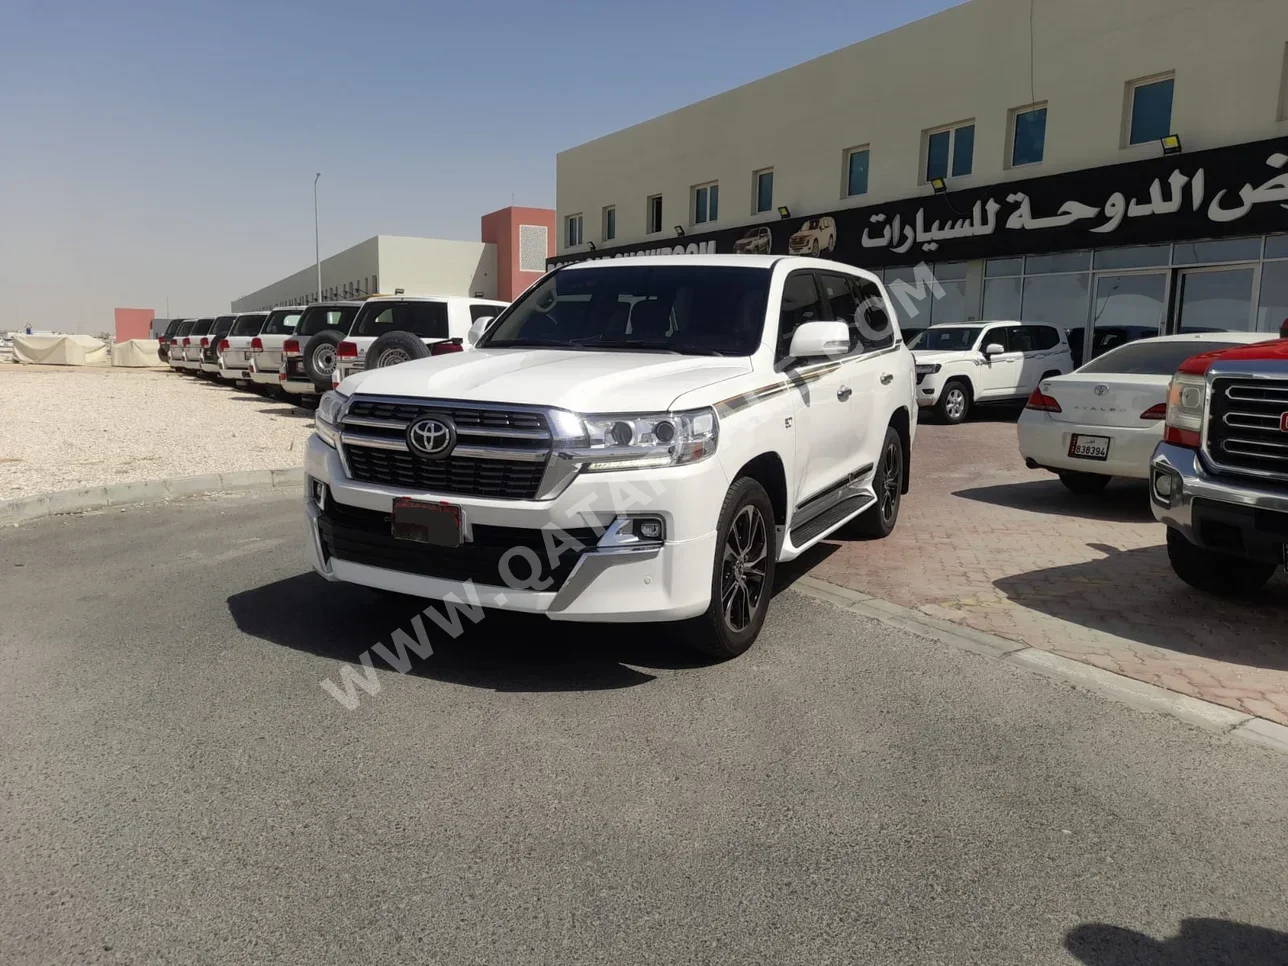 Toyota  Land Cruiser  G  2016  Automatic  237,000 Km  6 Cylinder  Four Wheel Drive (4WD)  SUV  White